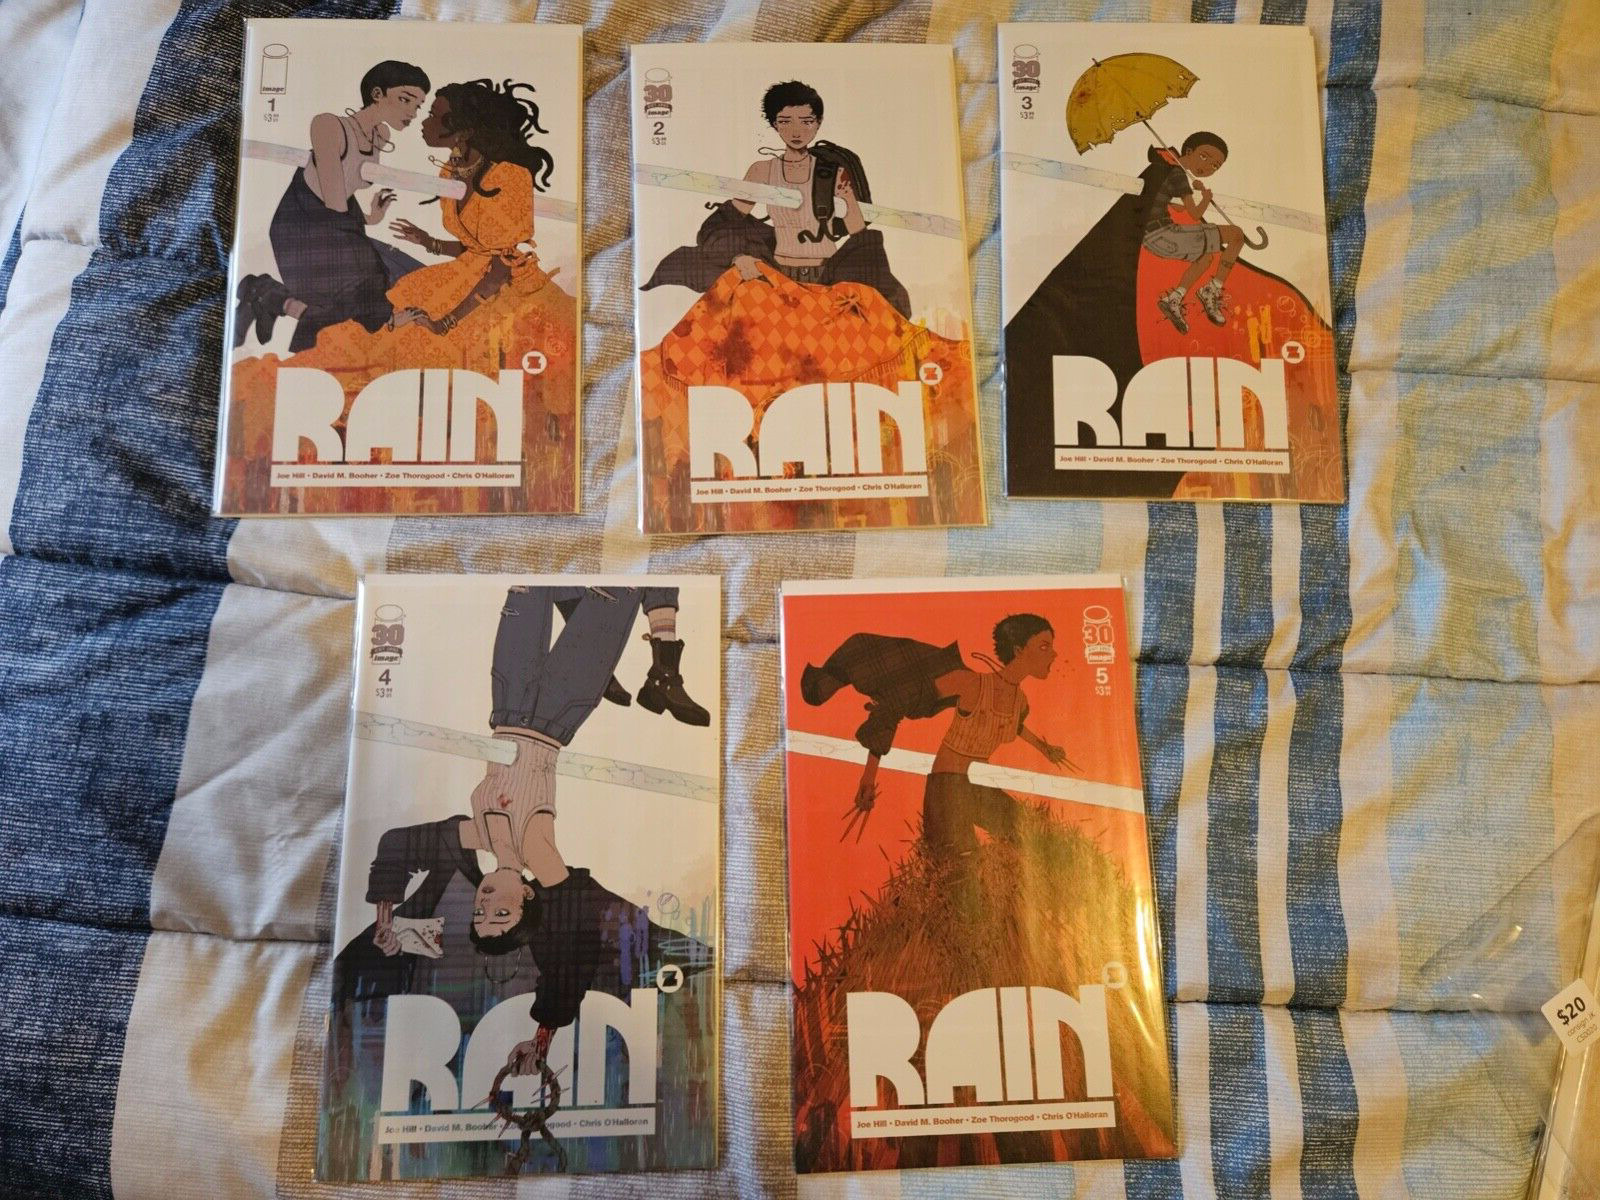 RAIN ISSUES 1 -5. BY JOE HILL IMAGE COMICS. ALL 1ST PRINT. ALL NM- OR BETTER